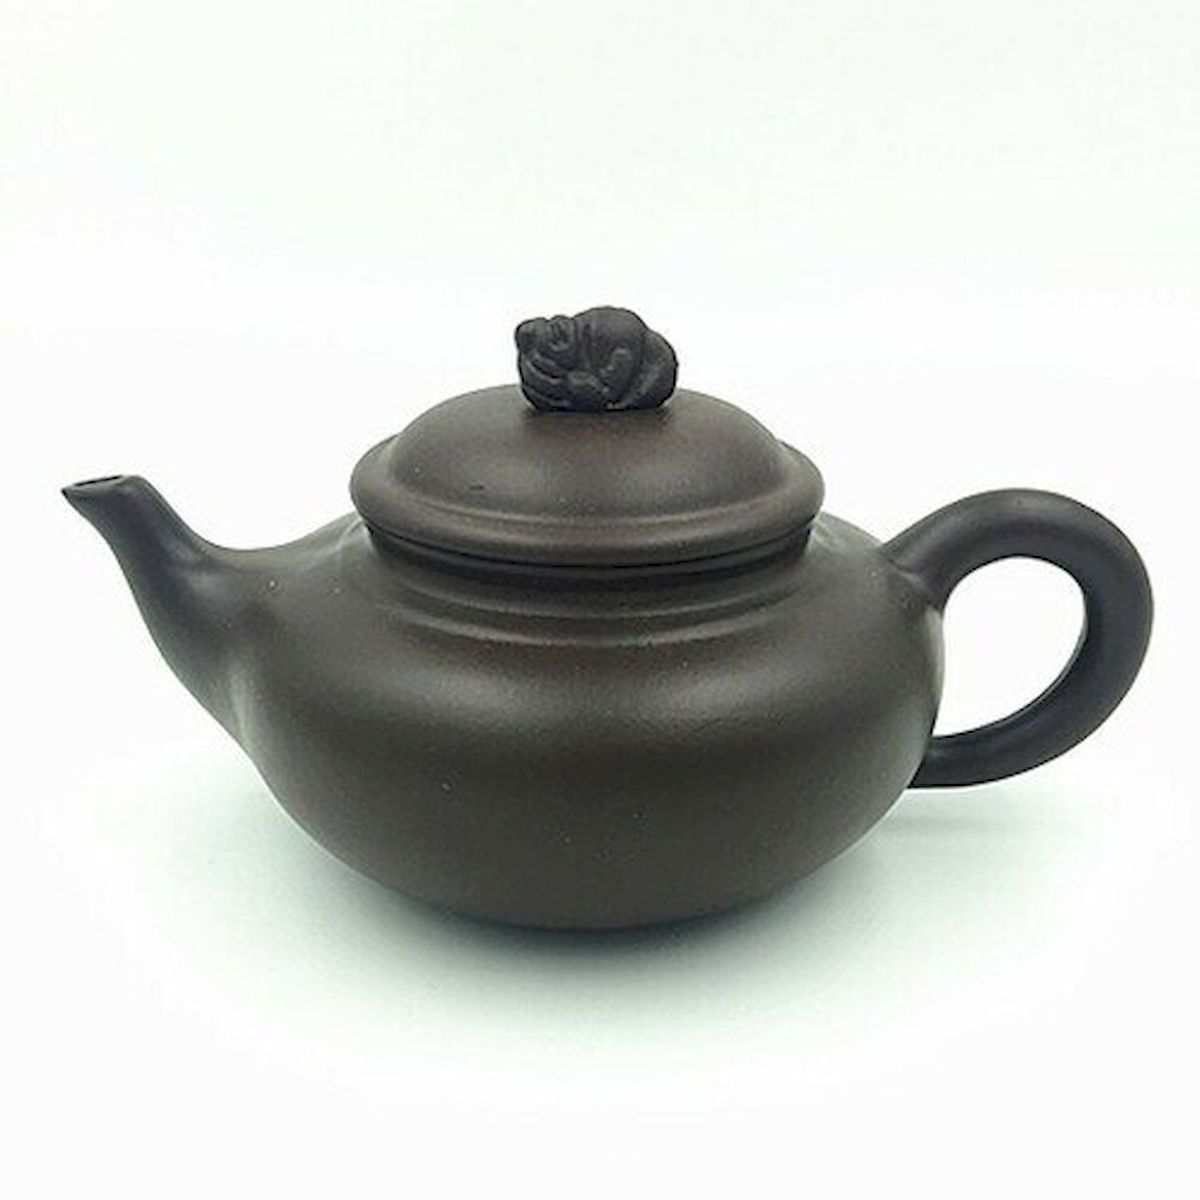 Picture of Mr. MJs HO-YX-1004 Yixing Clay Teapot